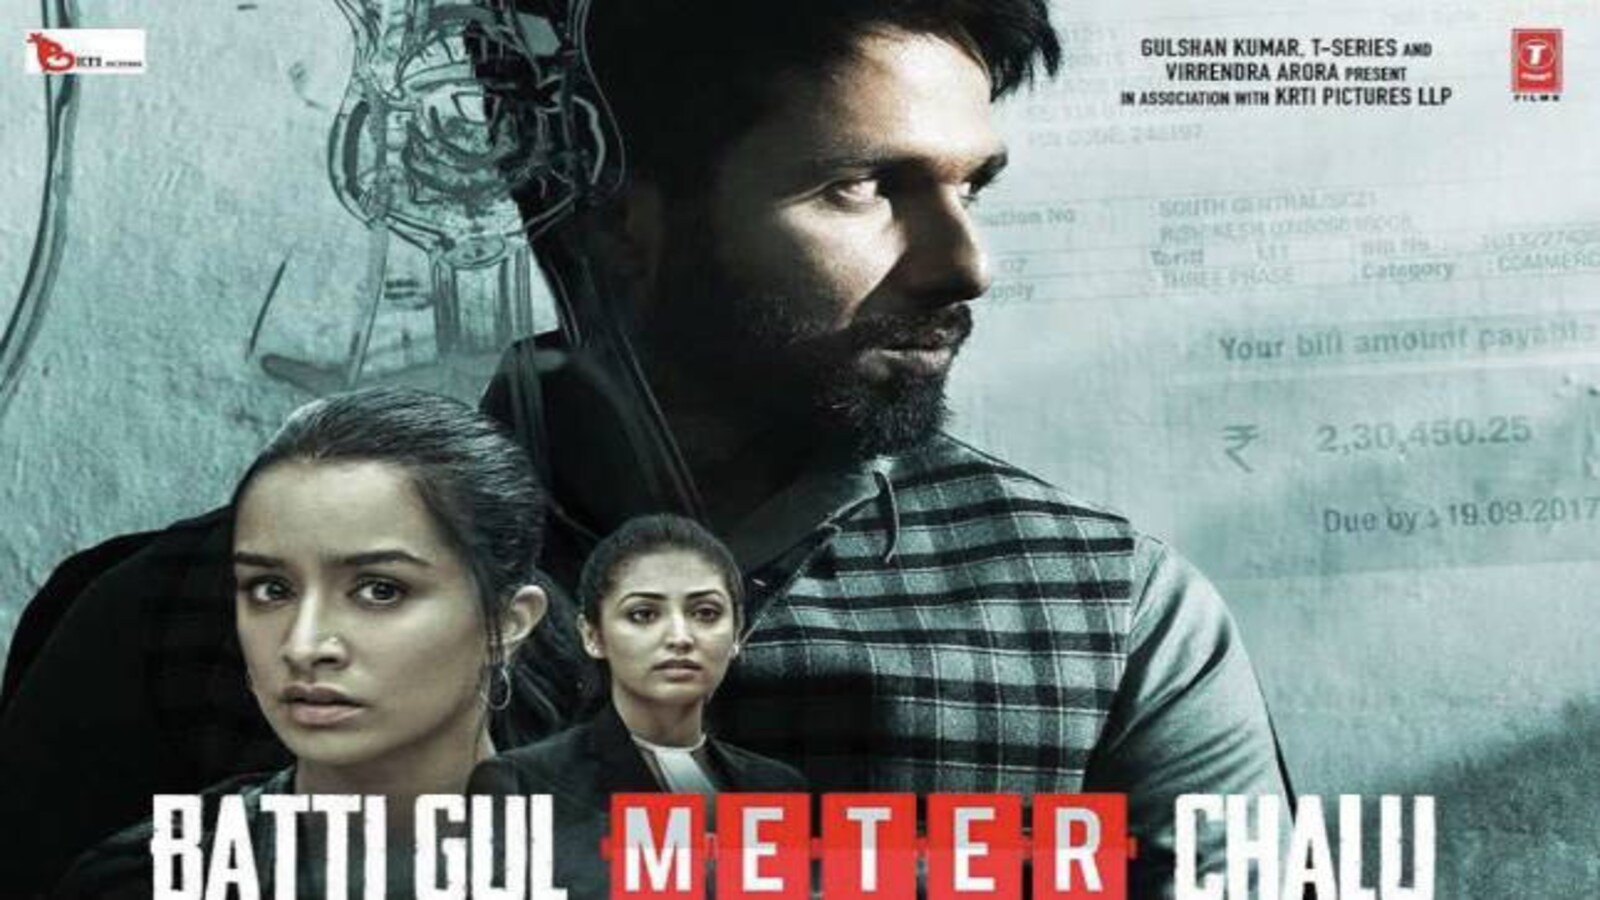 Before the release of Batti Gul Meter Chalu, let's take a look at 'current'  issues in India